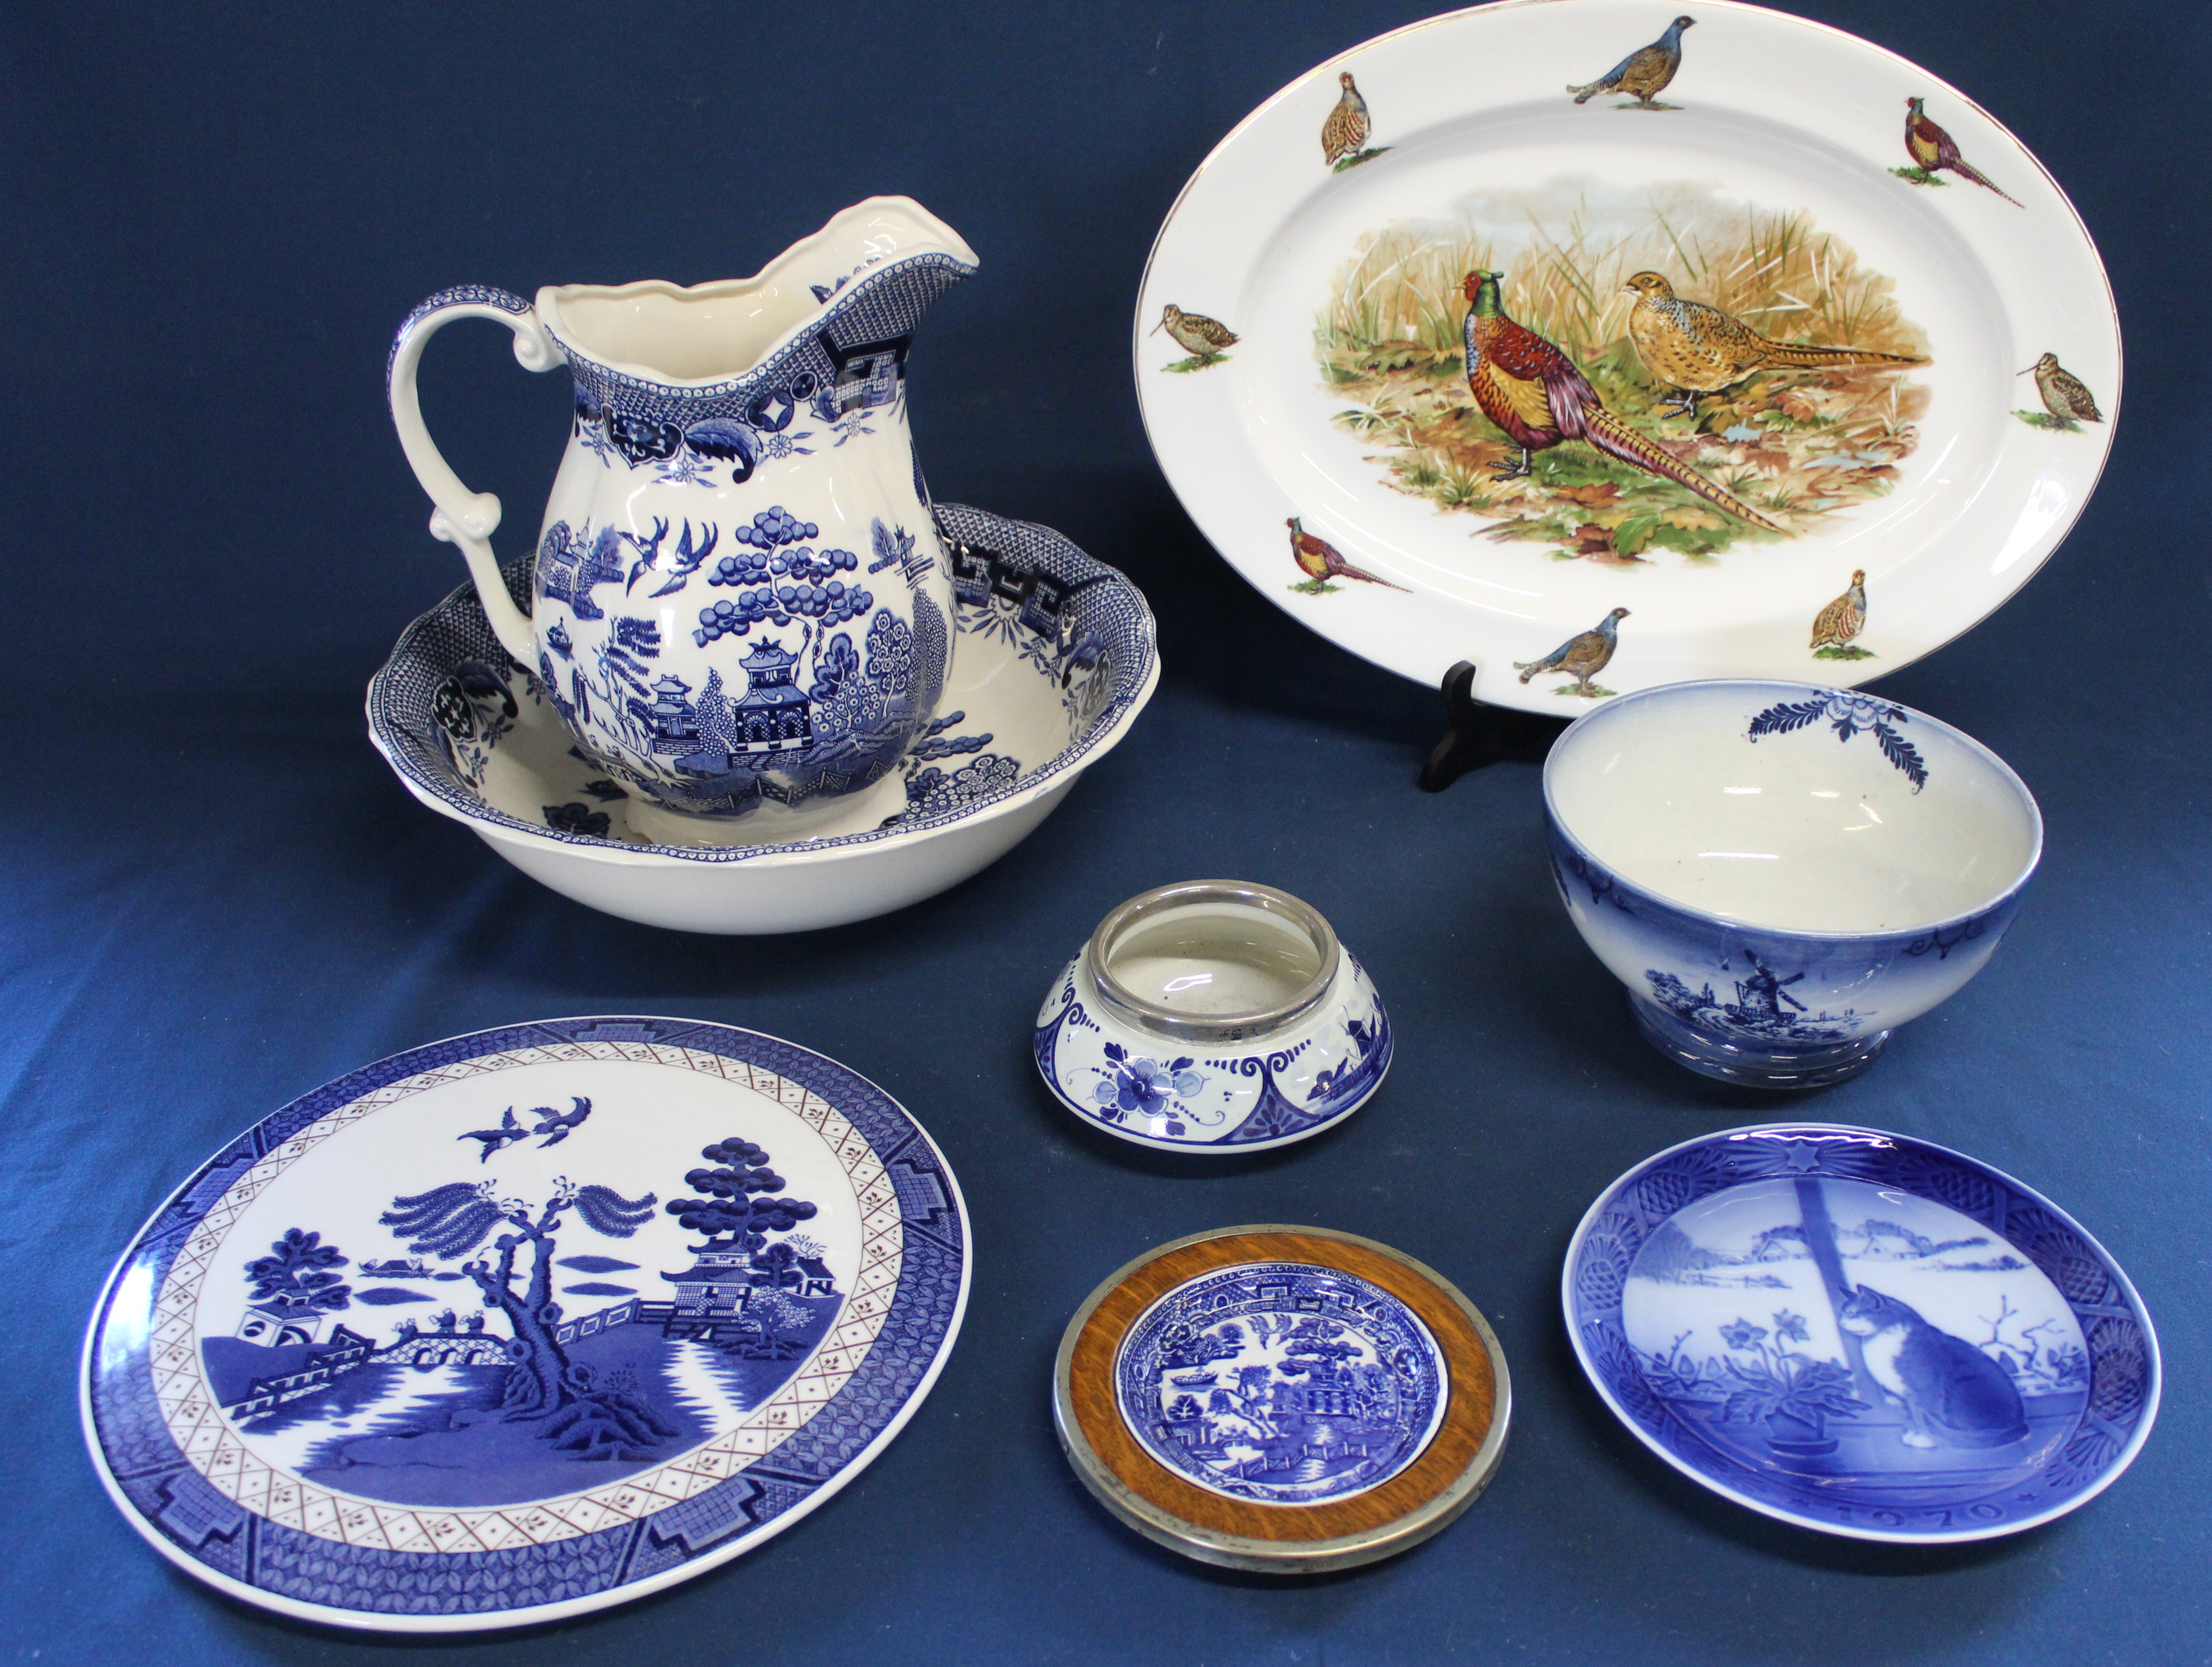 Willow pattern jug & bowl, Royal Doulton Booth's Real Old Willow cheese plate & similar butter dish,